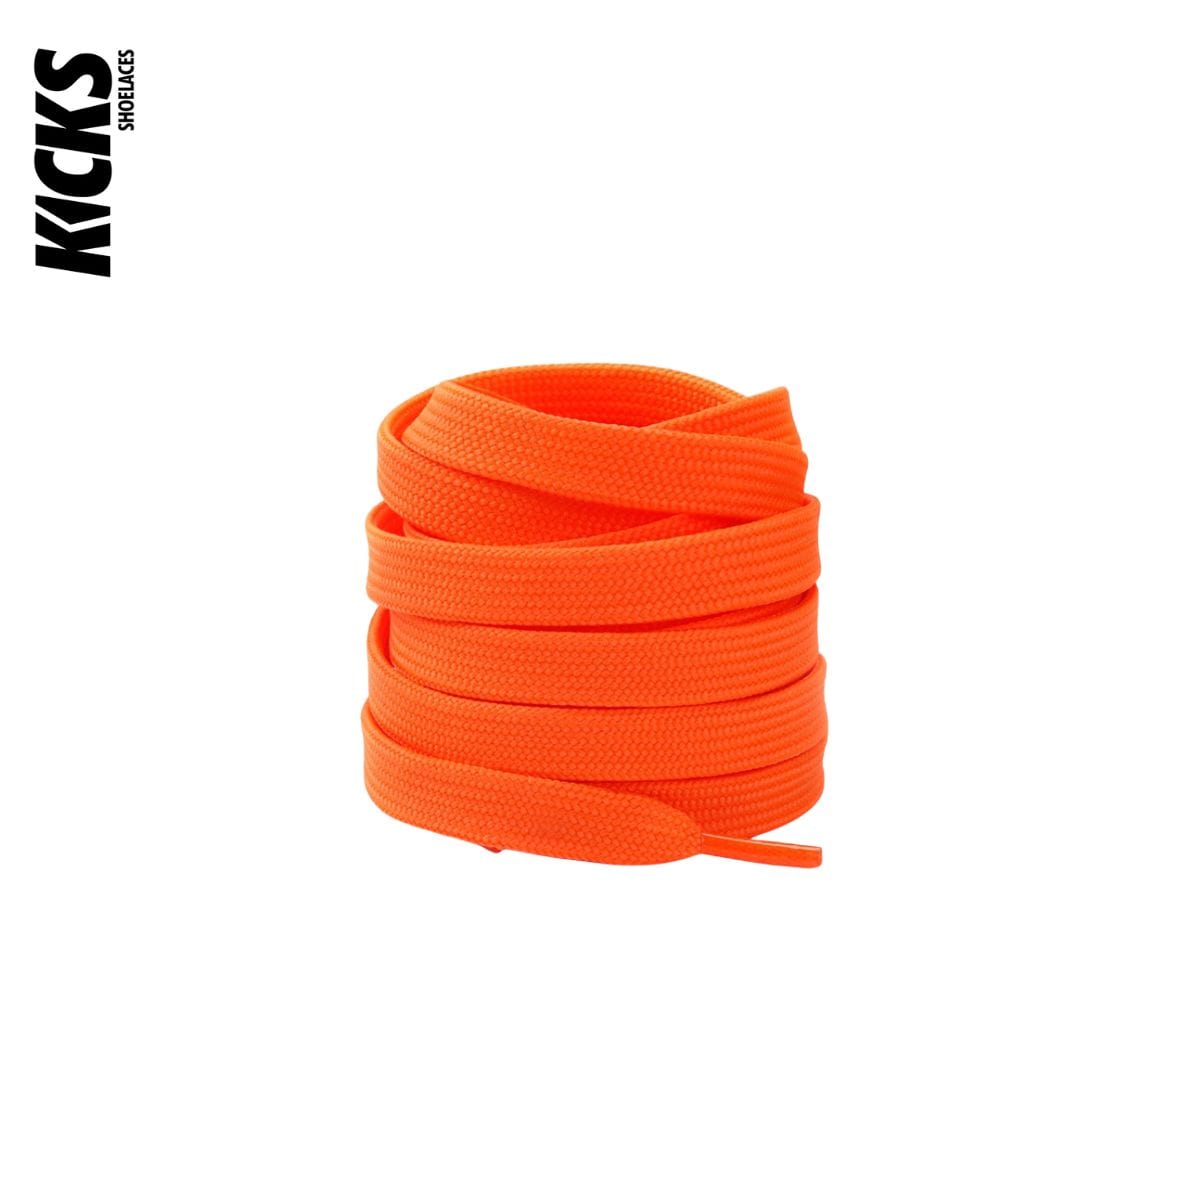 Orange Replacement Laces for Adidas EQT Sneakers by Kicks Shoelaces